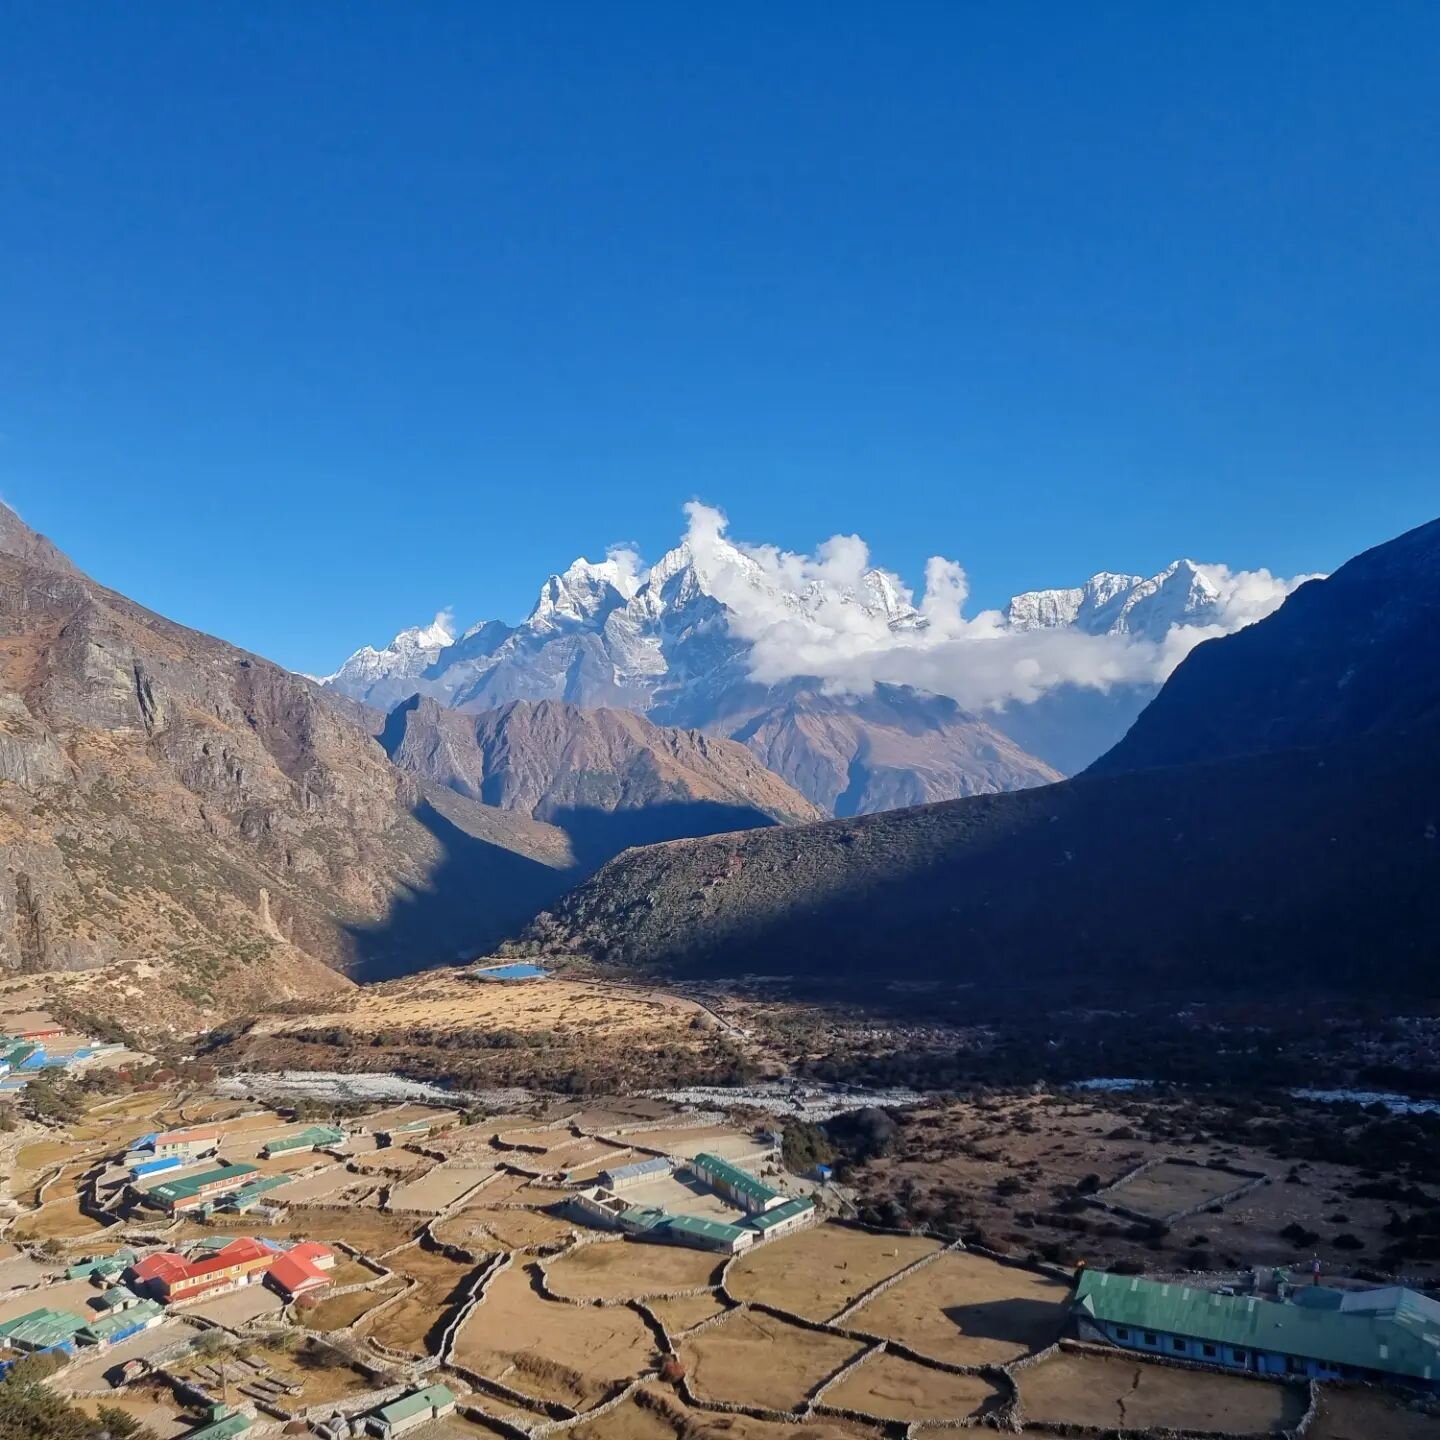 Exciting news!

We&rsquo;ve just returned from a trip to the Everest region in Nepal and it was incredible. 

Along with breathtaking views we enjoyed being immersed in the culture of Nepal, tasting traditional cuisines, exploring beautiful monasteri